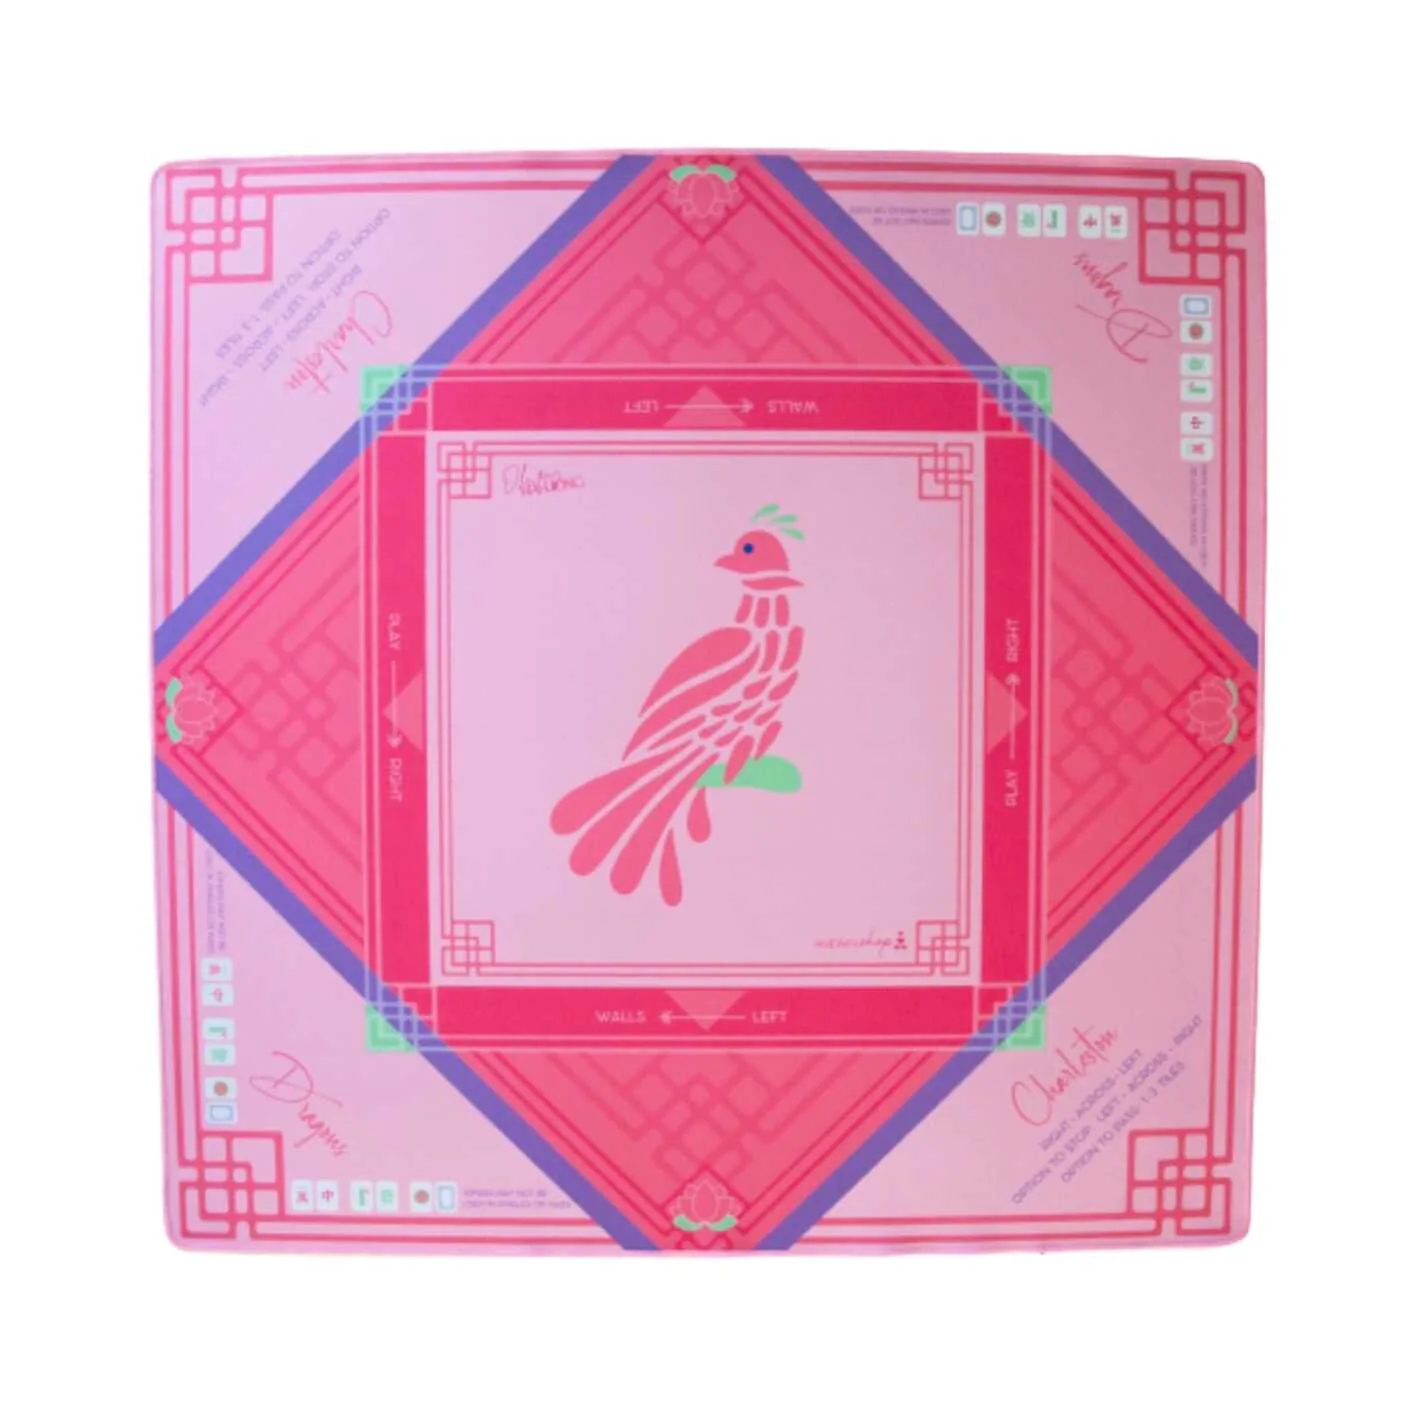 Bird Bam Mahjong mat in light pink, hot pink and green and purple accents with a hot pink bird in the center.